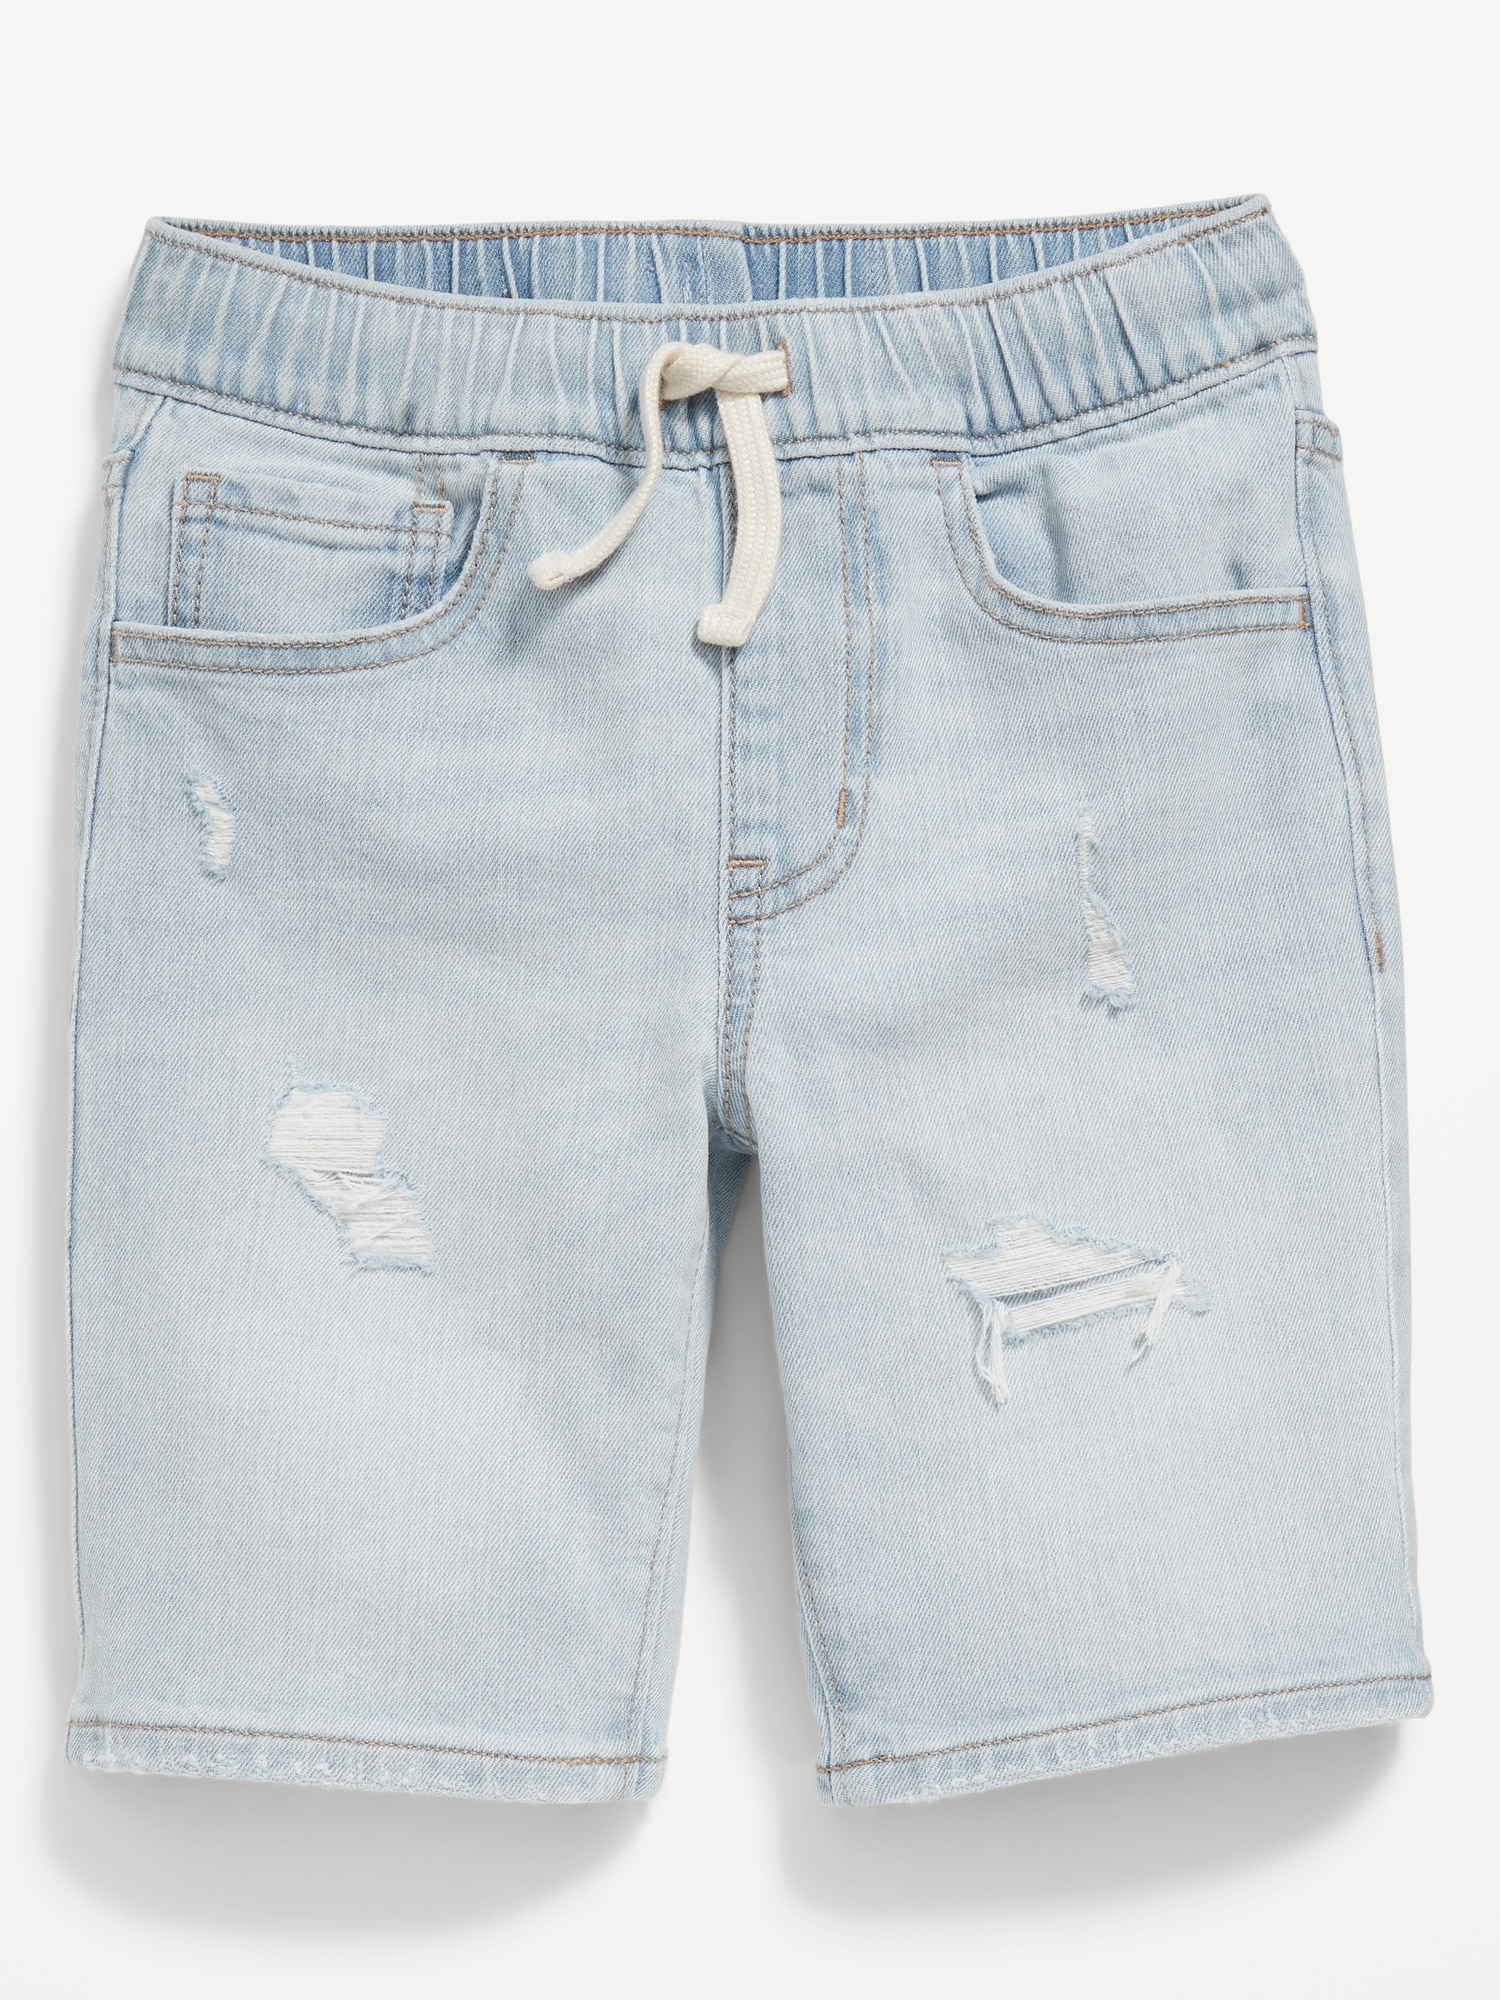 Knee Length 360° Stretch Pull-On Jean Shorts for Boys